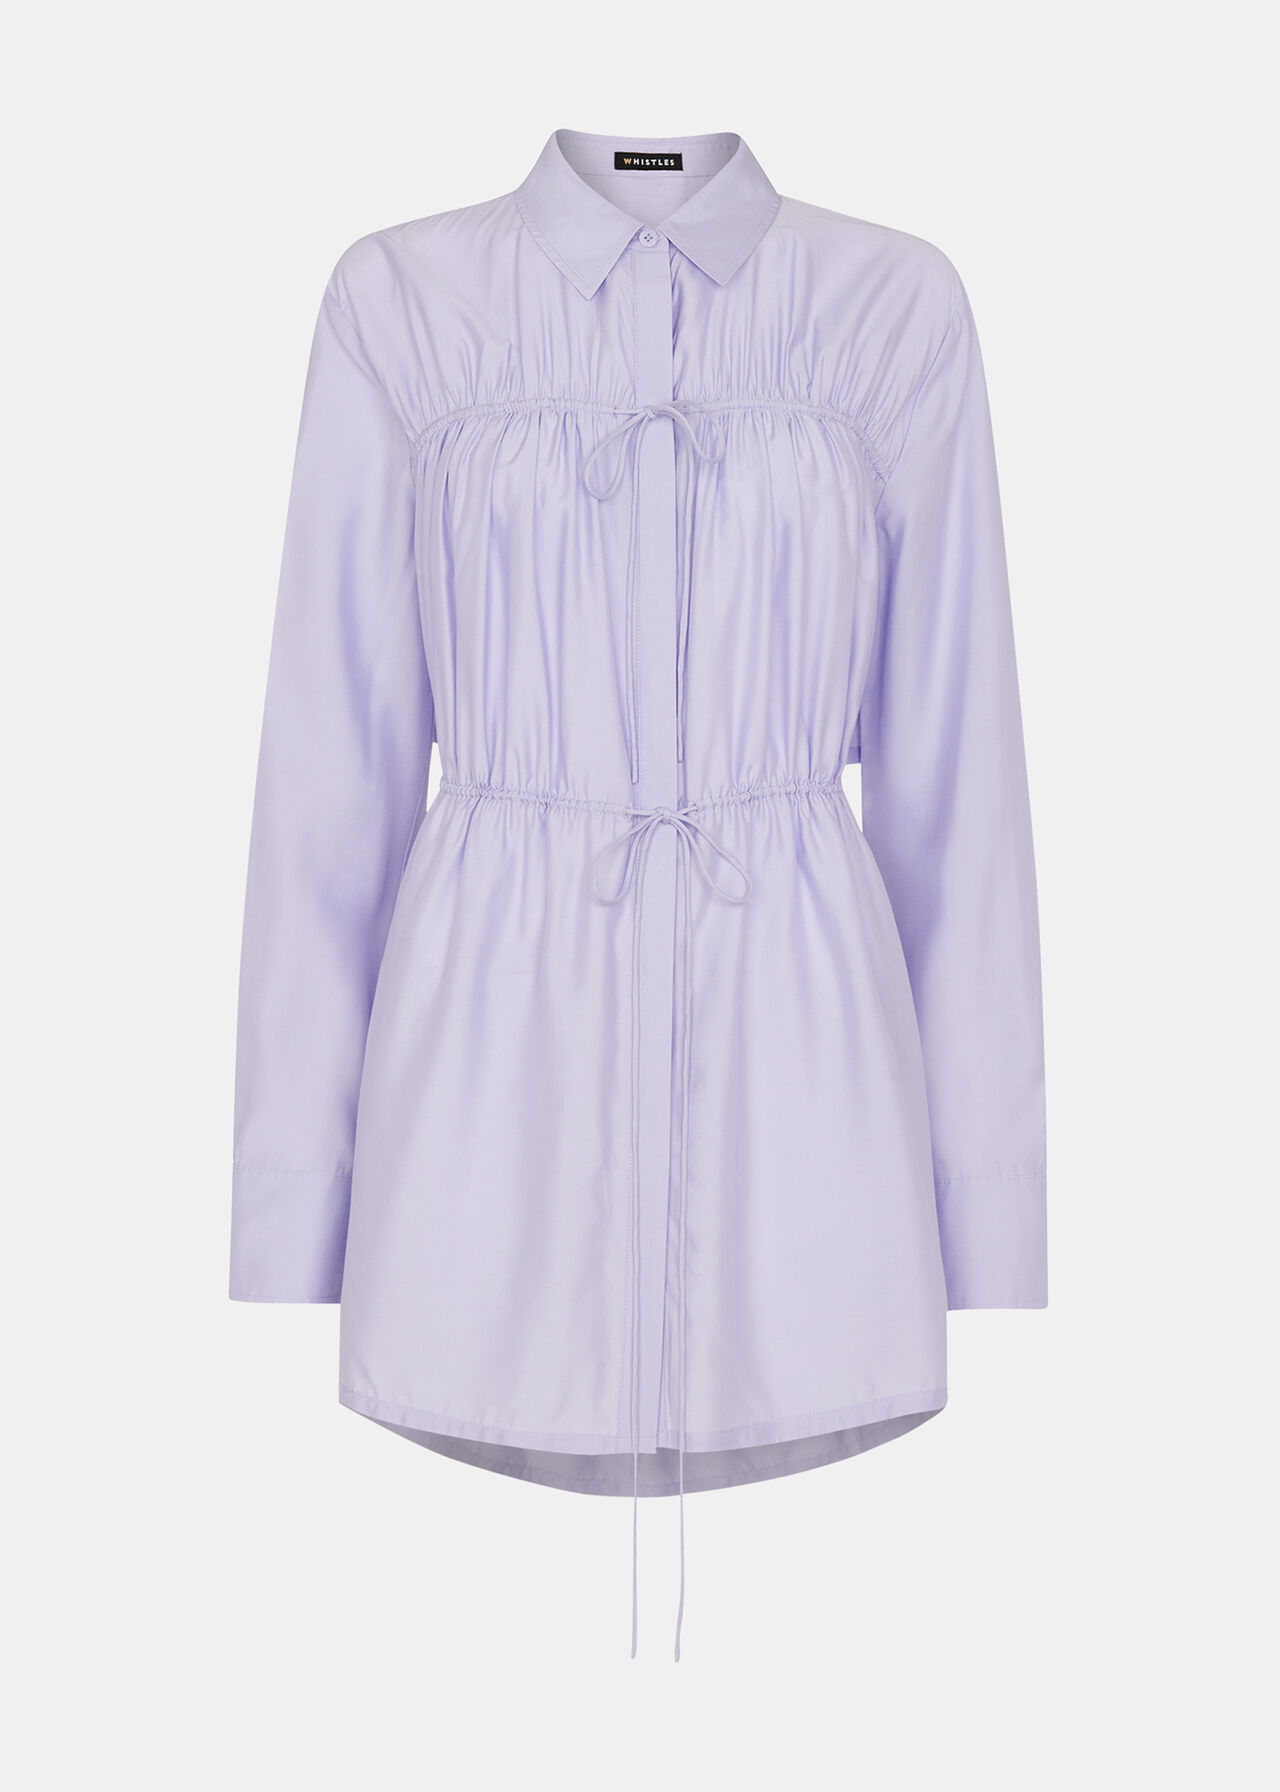 Lilac Drawcord Cut Out Back Shirt | WHISTLES